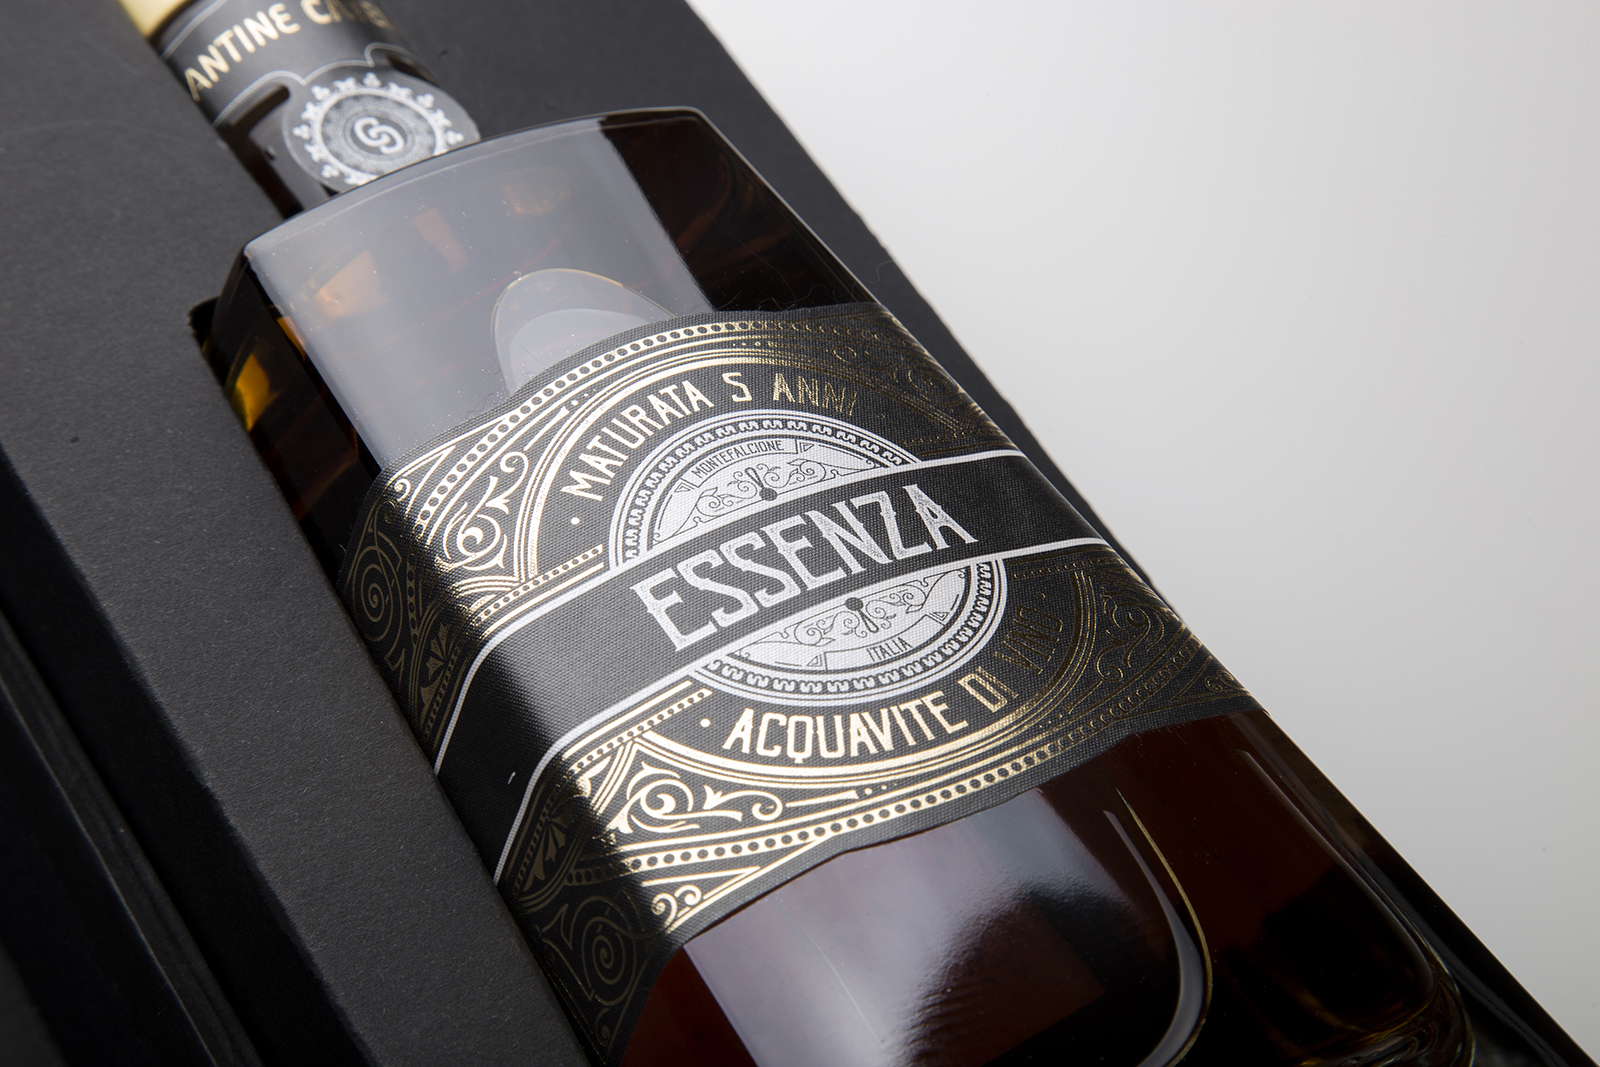 New Brand – Essenza – for Cantine Catena Italy